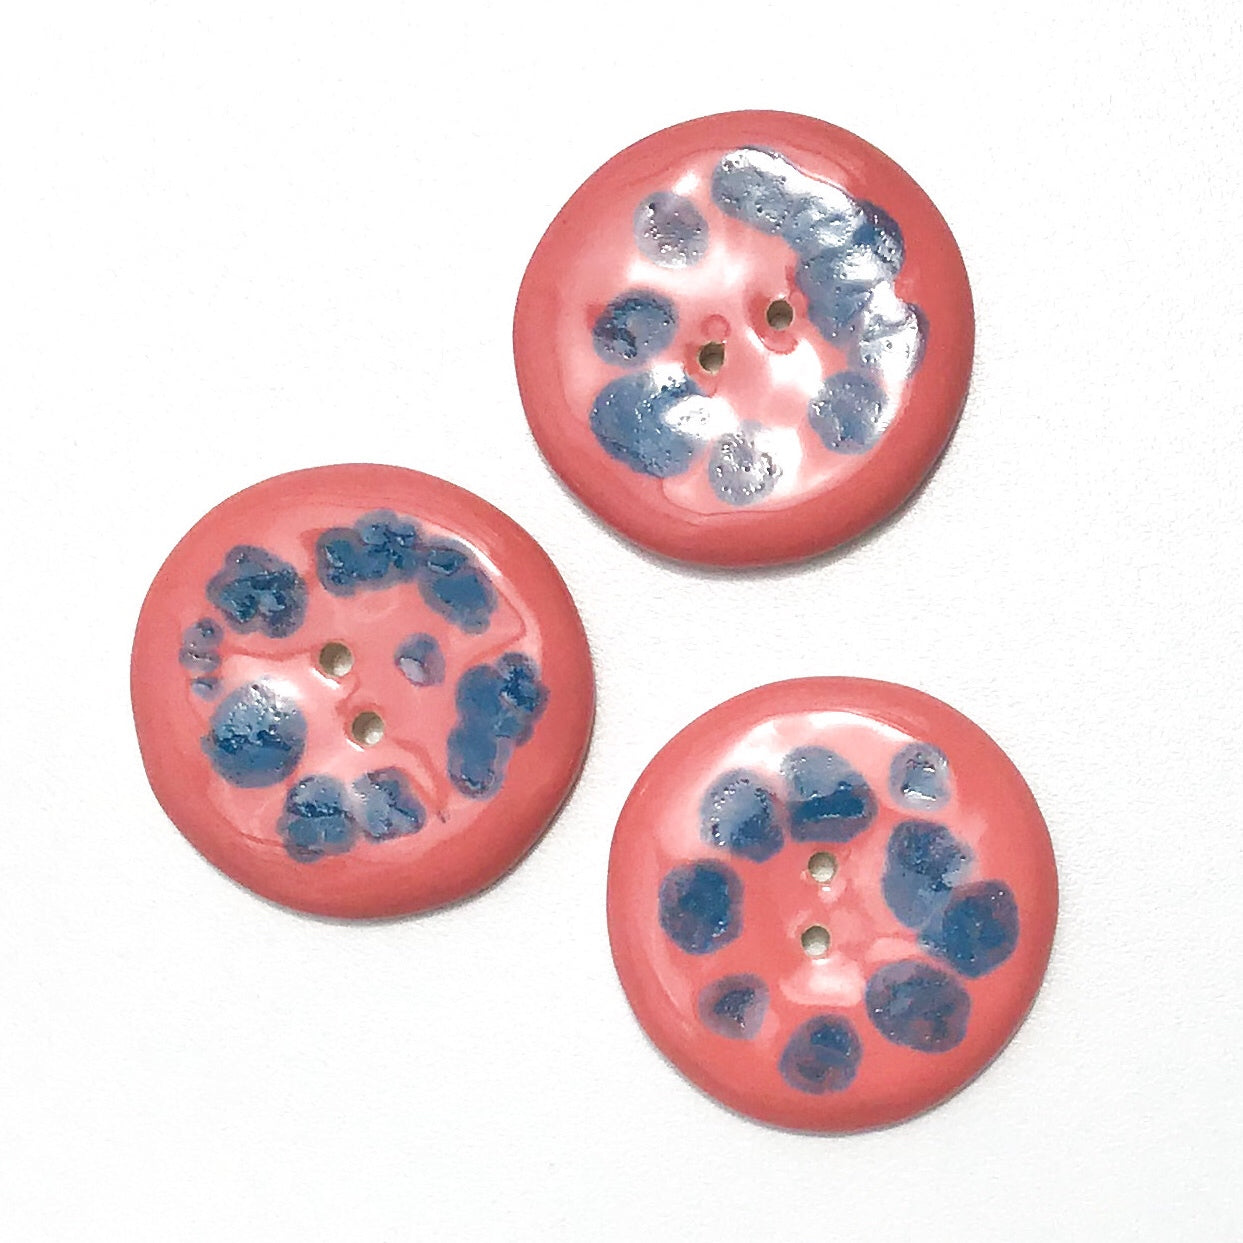 Large Coral Ceramic Button with Bursts of Turquoise - Decorative Clay Button - 1 1/2"